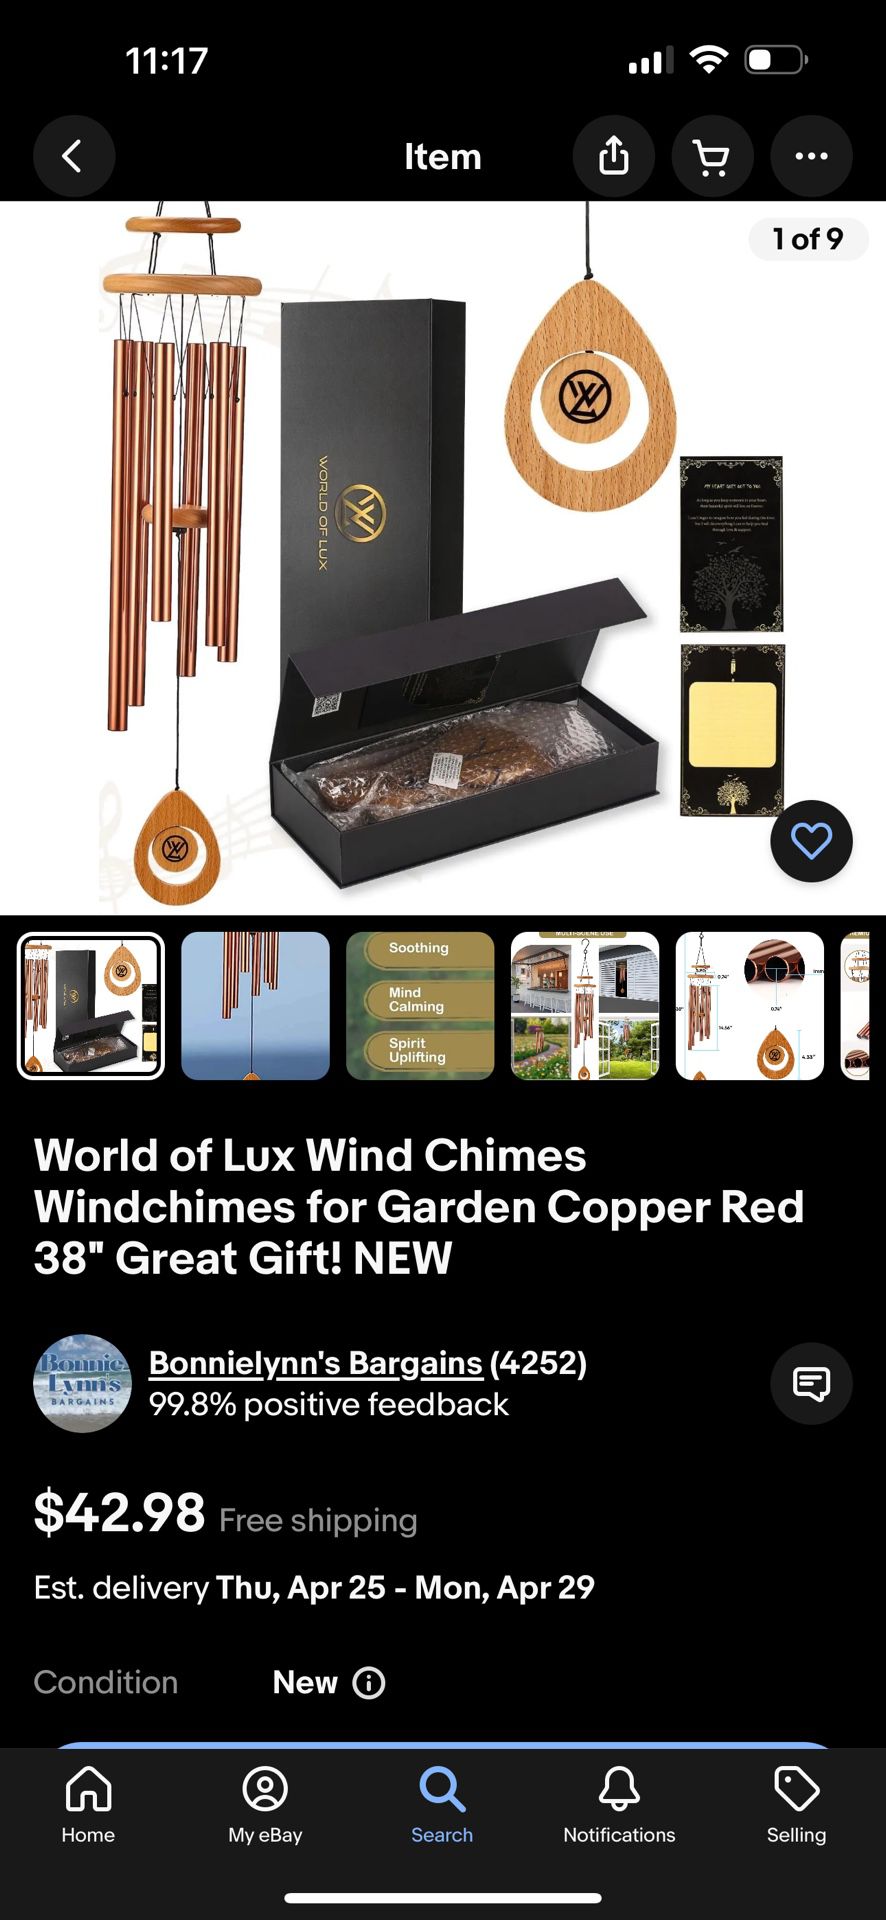 World of Lux Wind Chimes Windchimes for Garden Copper Red  38" Great Gift! NEW